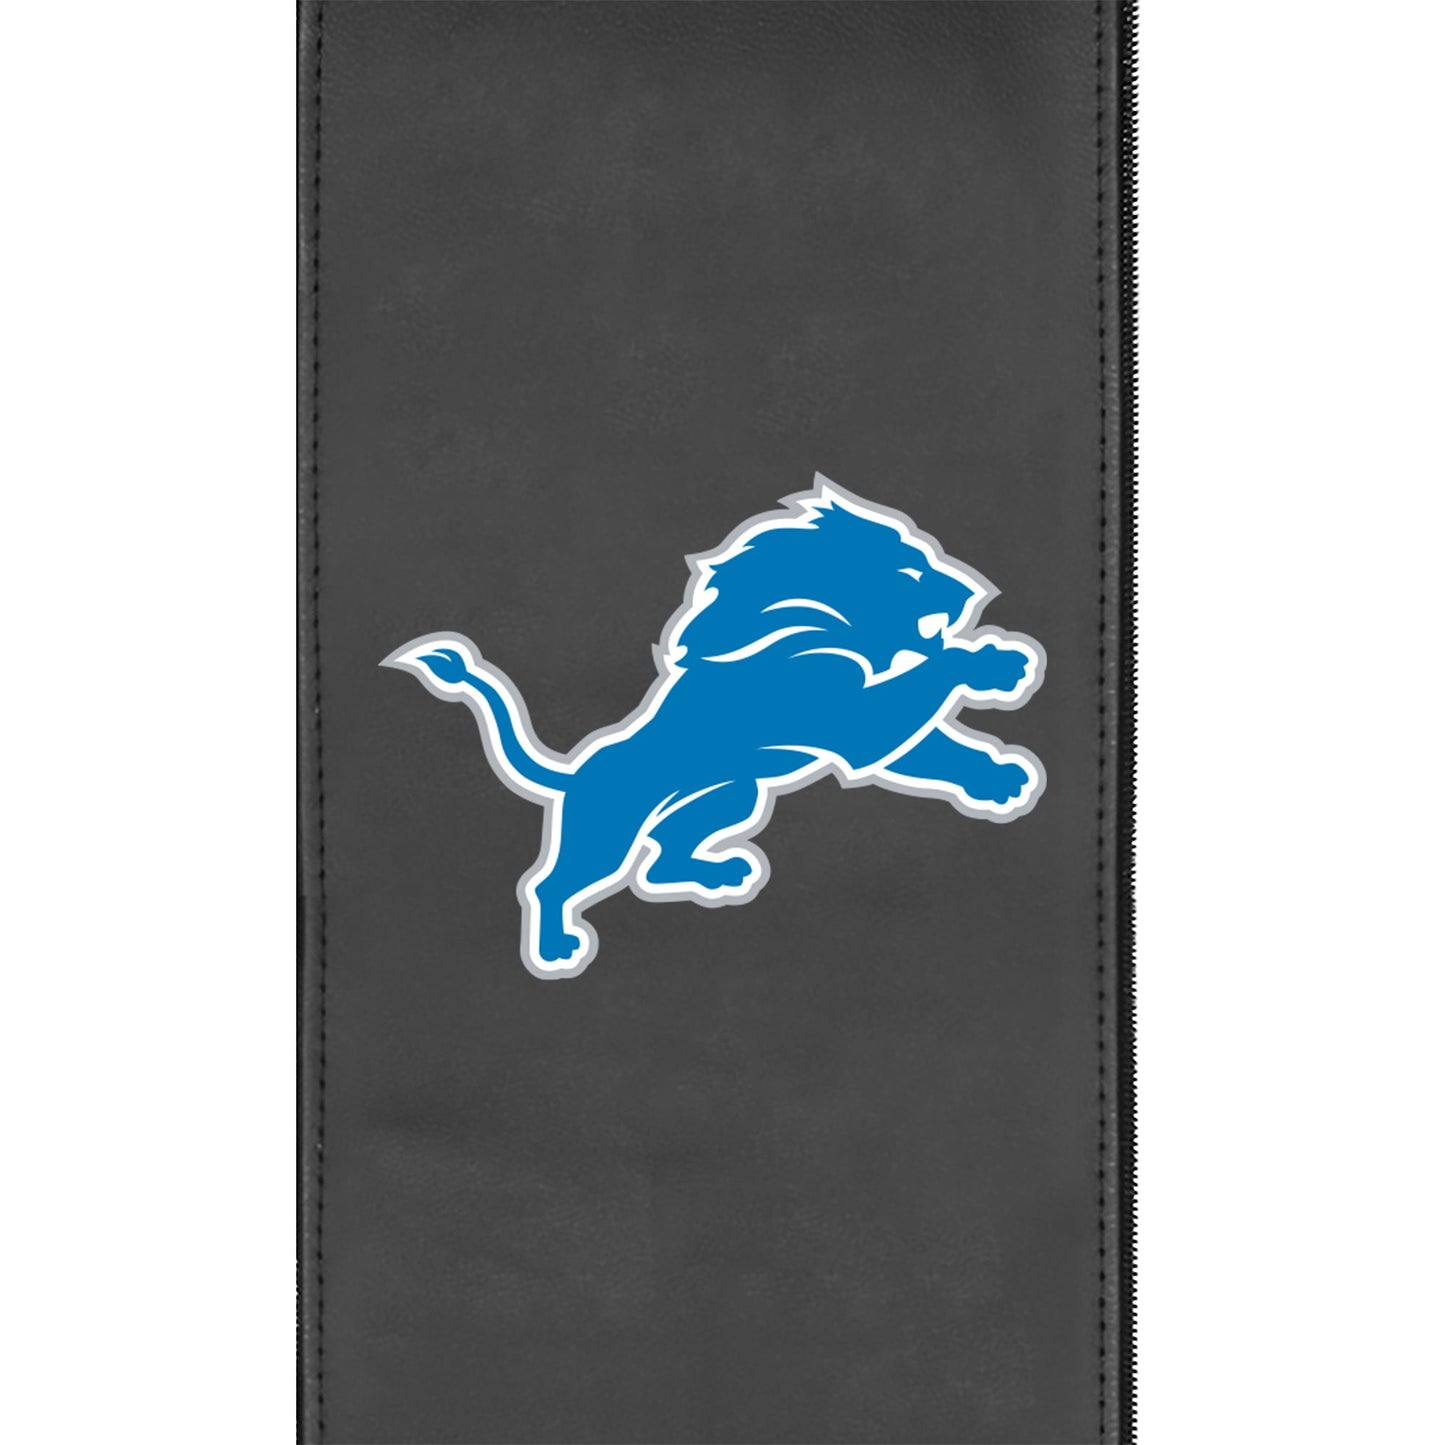 Silver Loveseat with  Detroit Lions Primary Logo